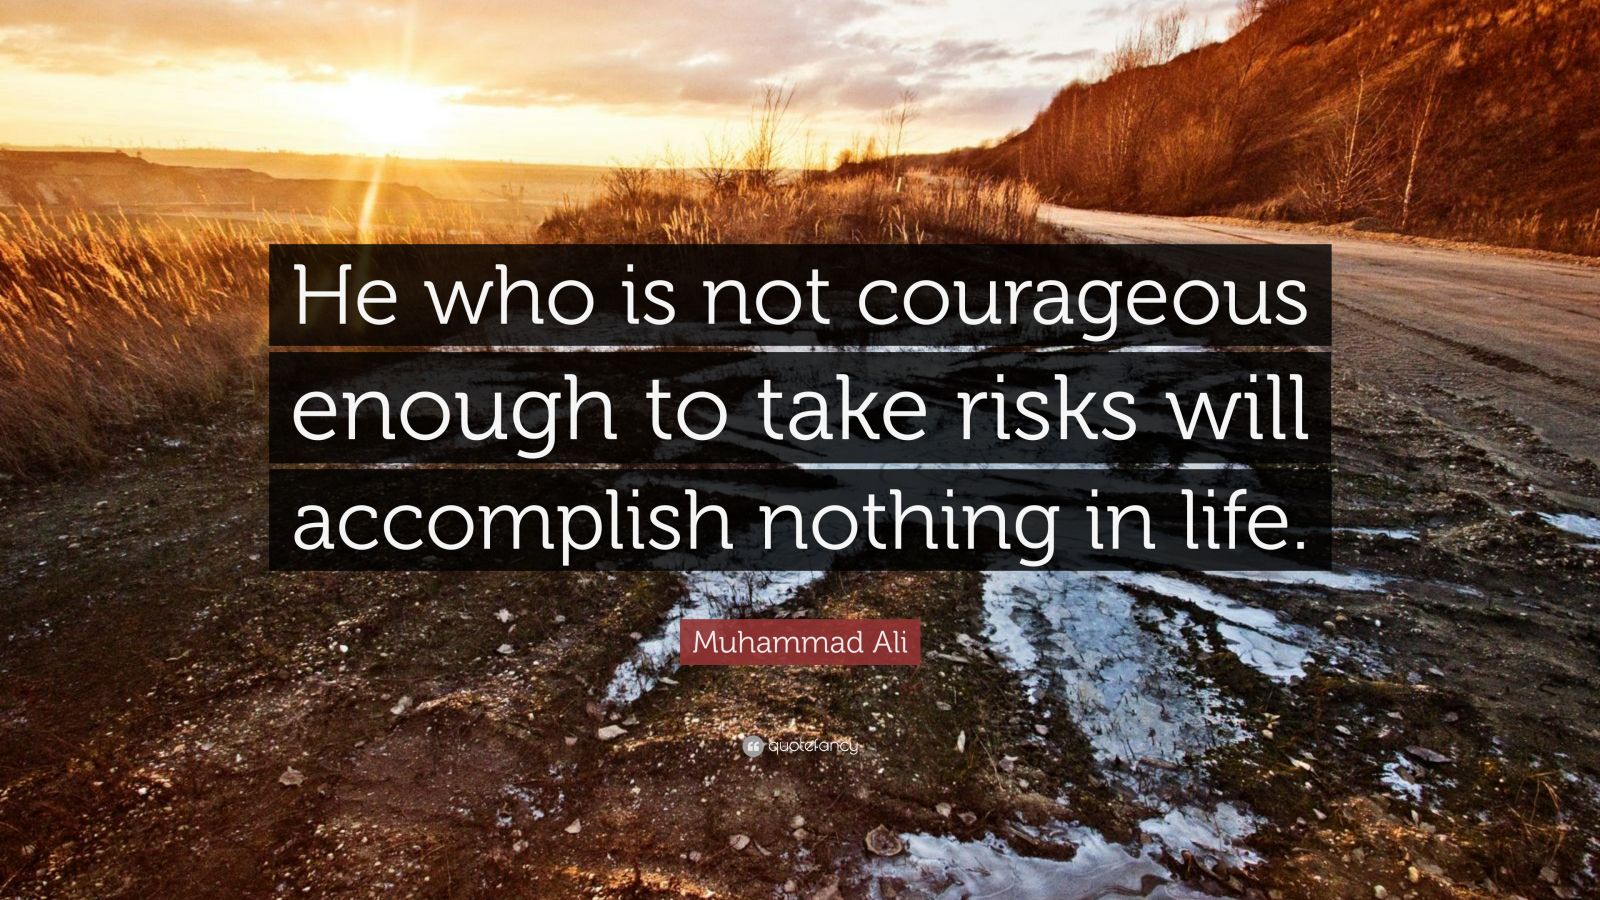 Muhammad Ali Quote: “He who is not courageous enough to take risks will